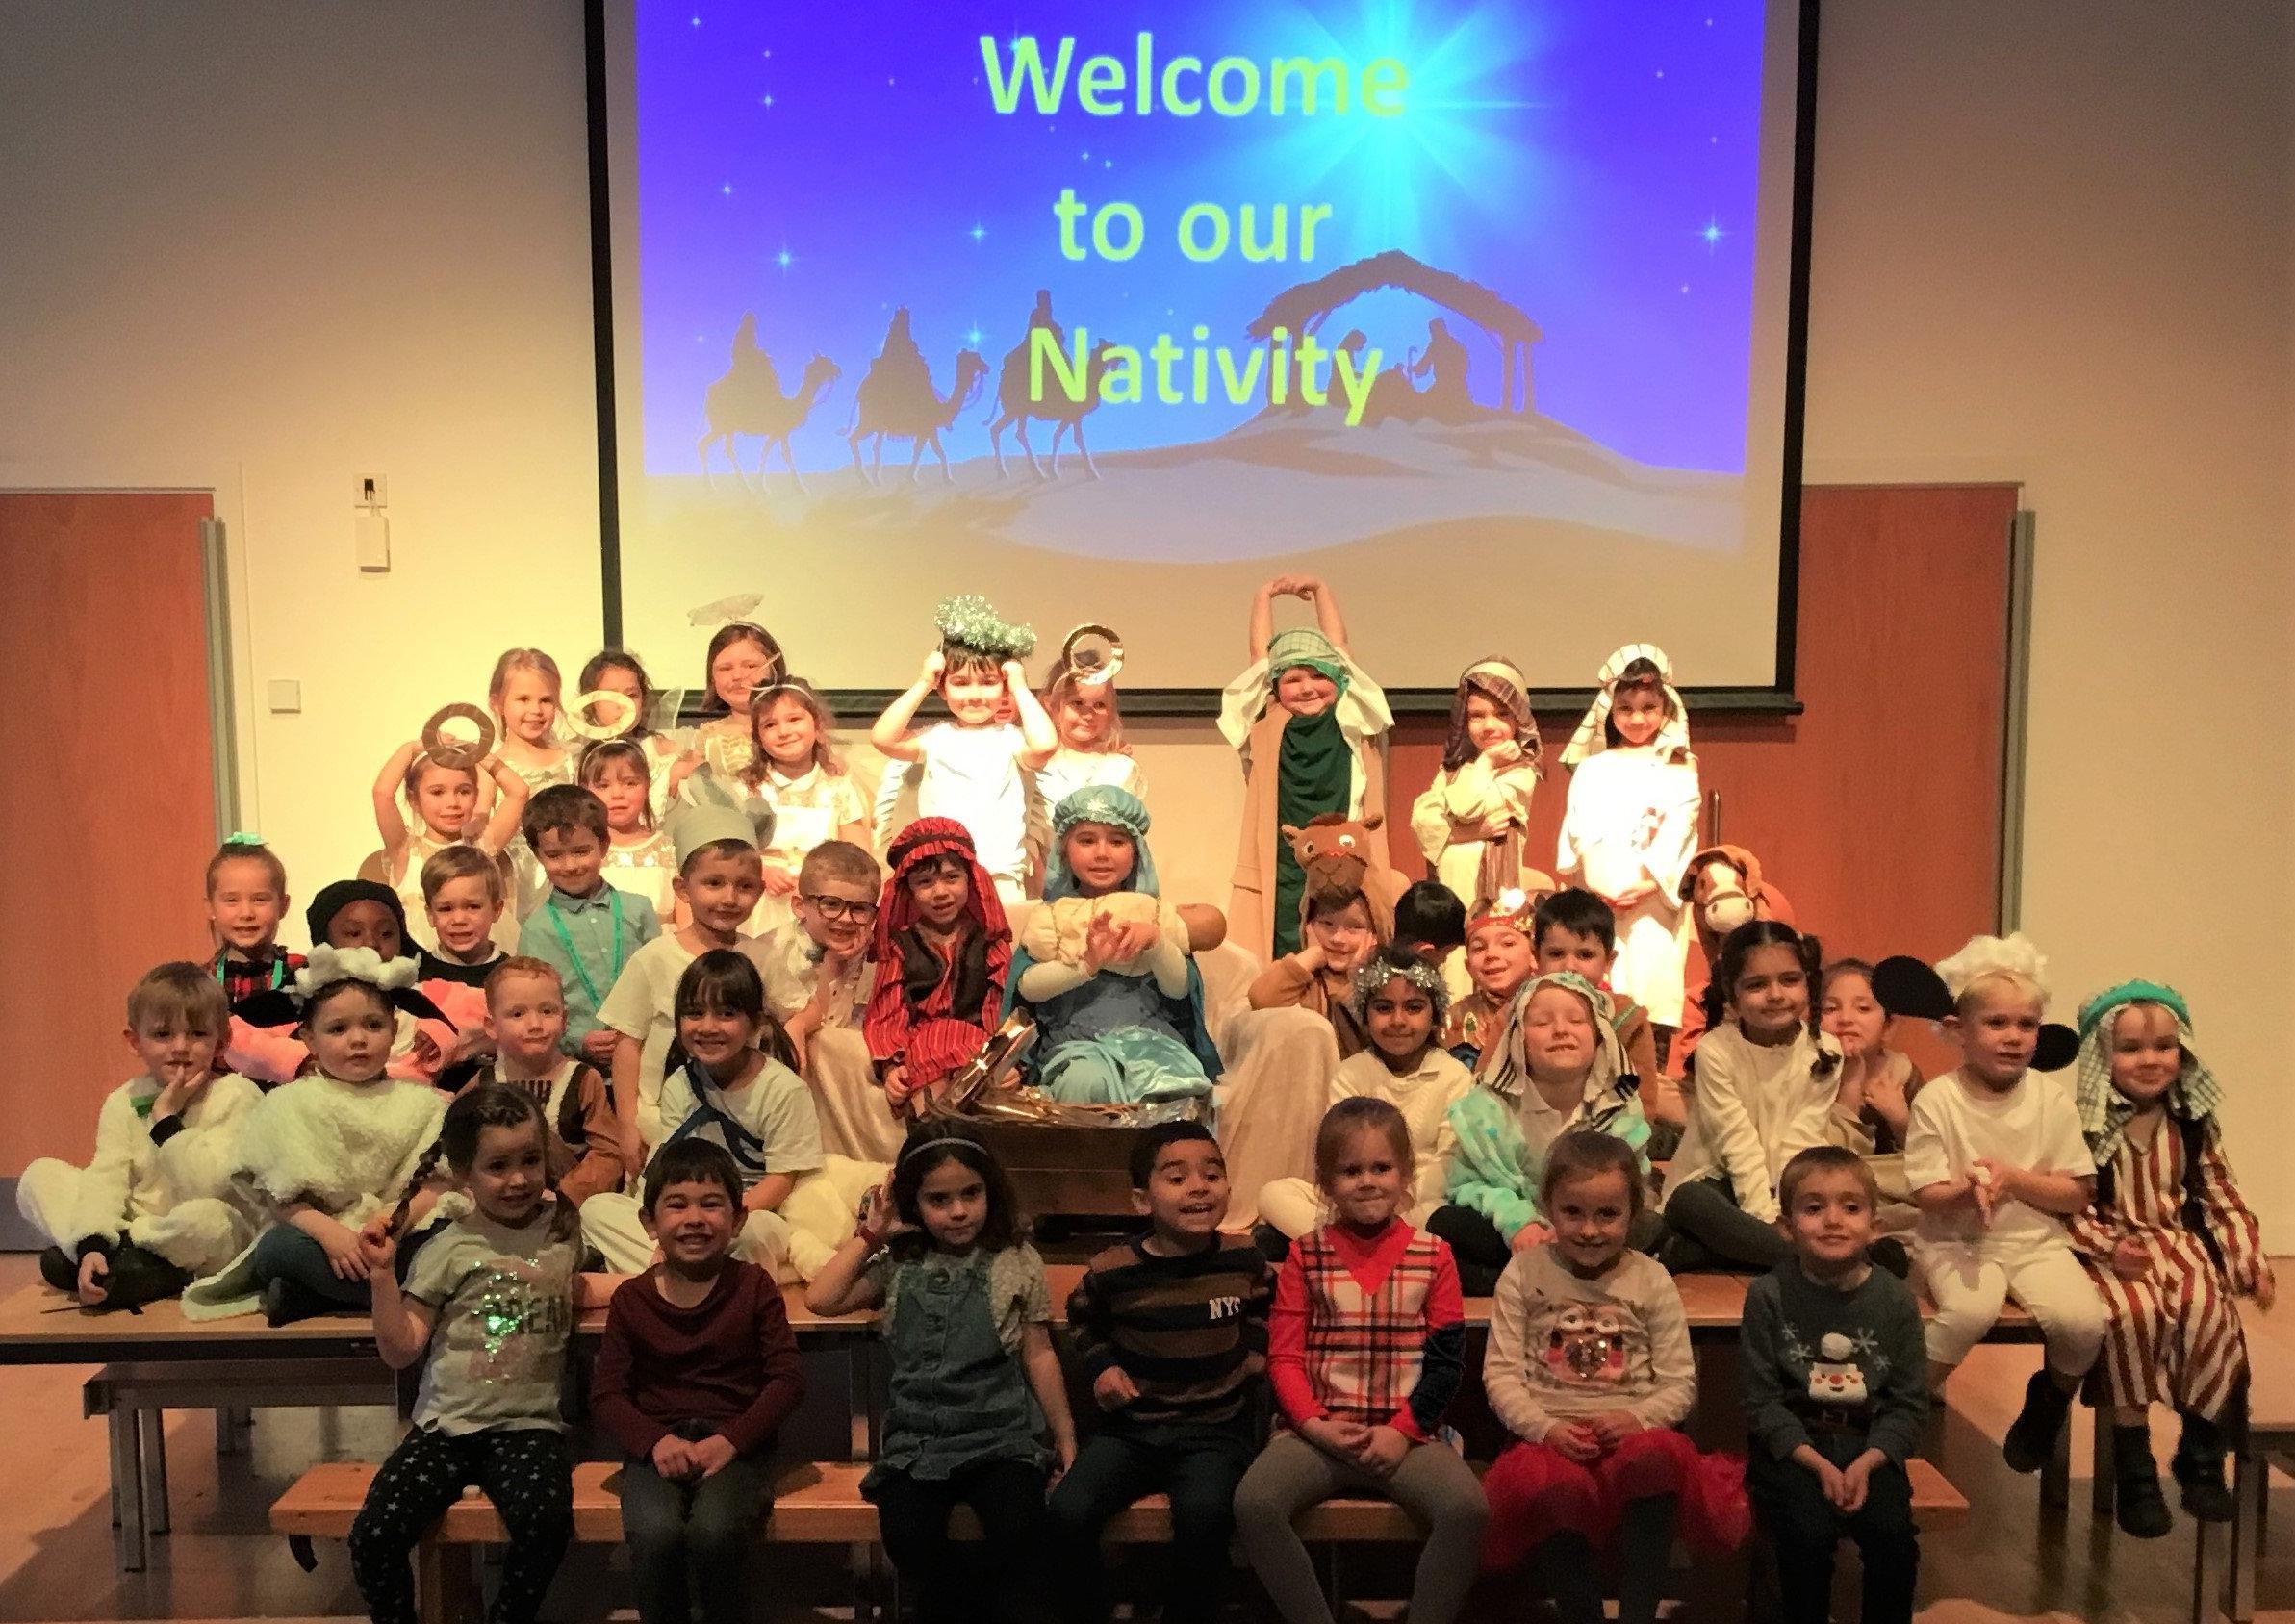 Arunside Primary School - "The children sang beautifully and spoke so confidently. We had a lot of proud parents and family friends in the audience as Arunside children took part in this wonderful performance to celebrate this special time of the year." SUS-191216-151400001